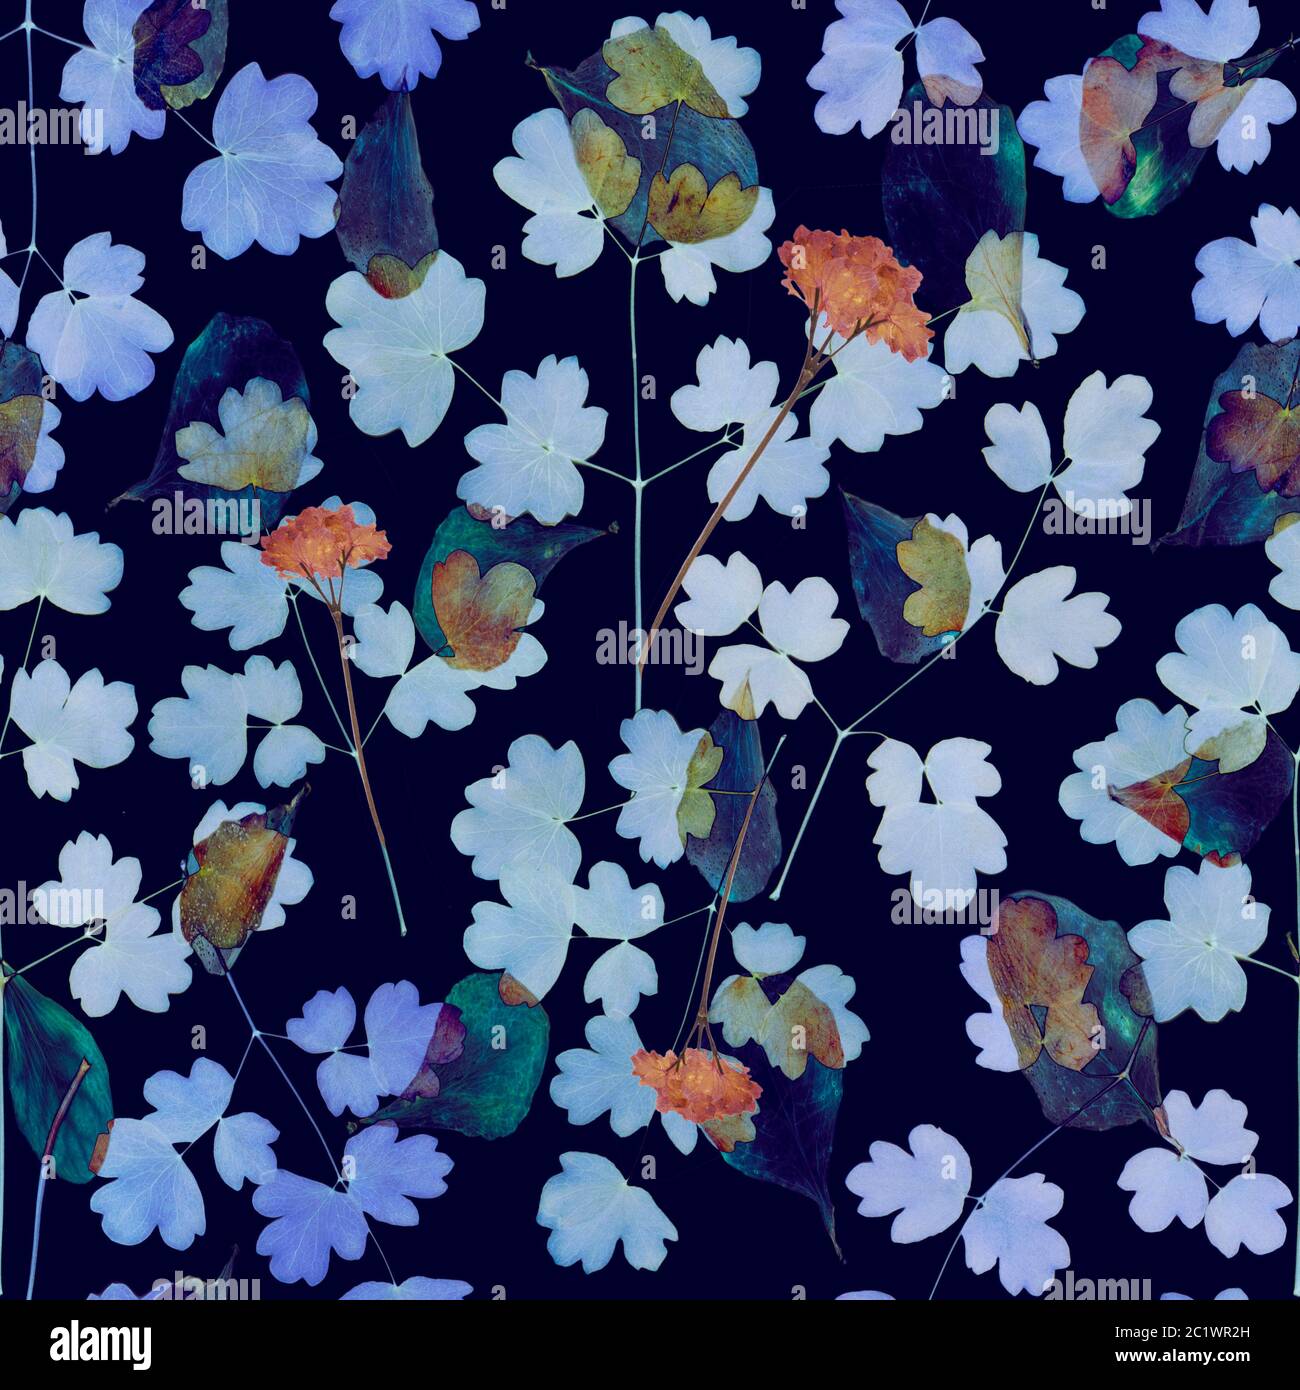 Seamless floral pattern with wild flowers on navy blue background Stock Photo